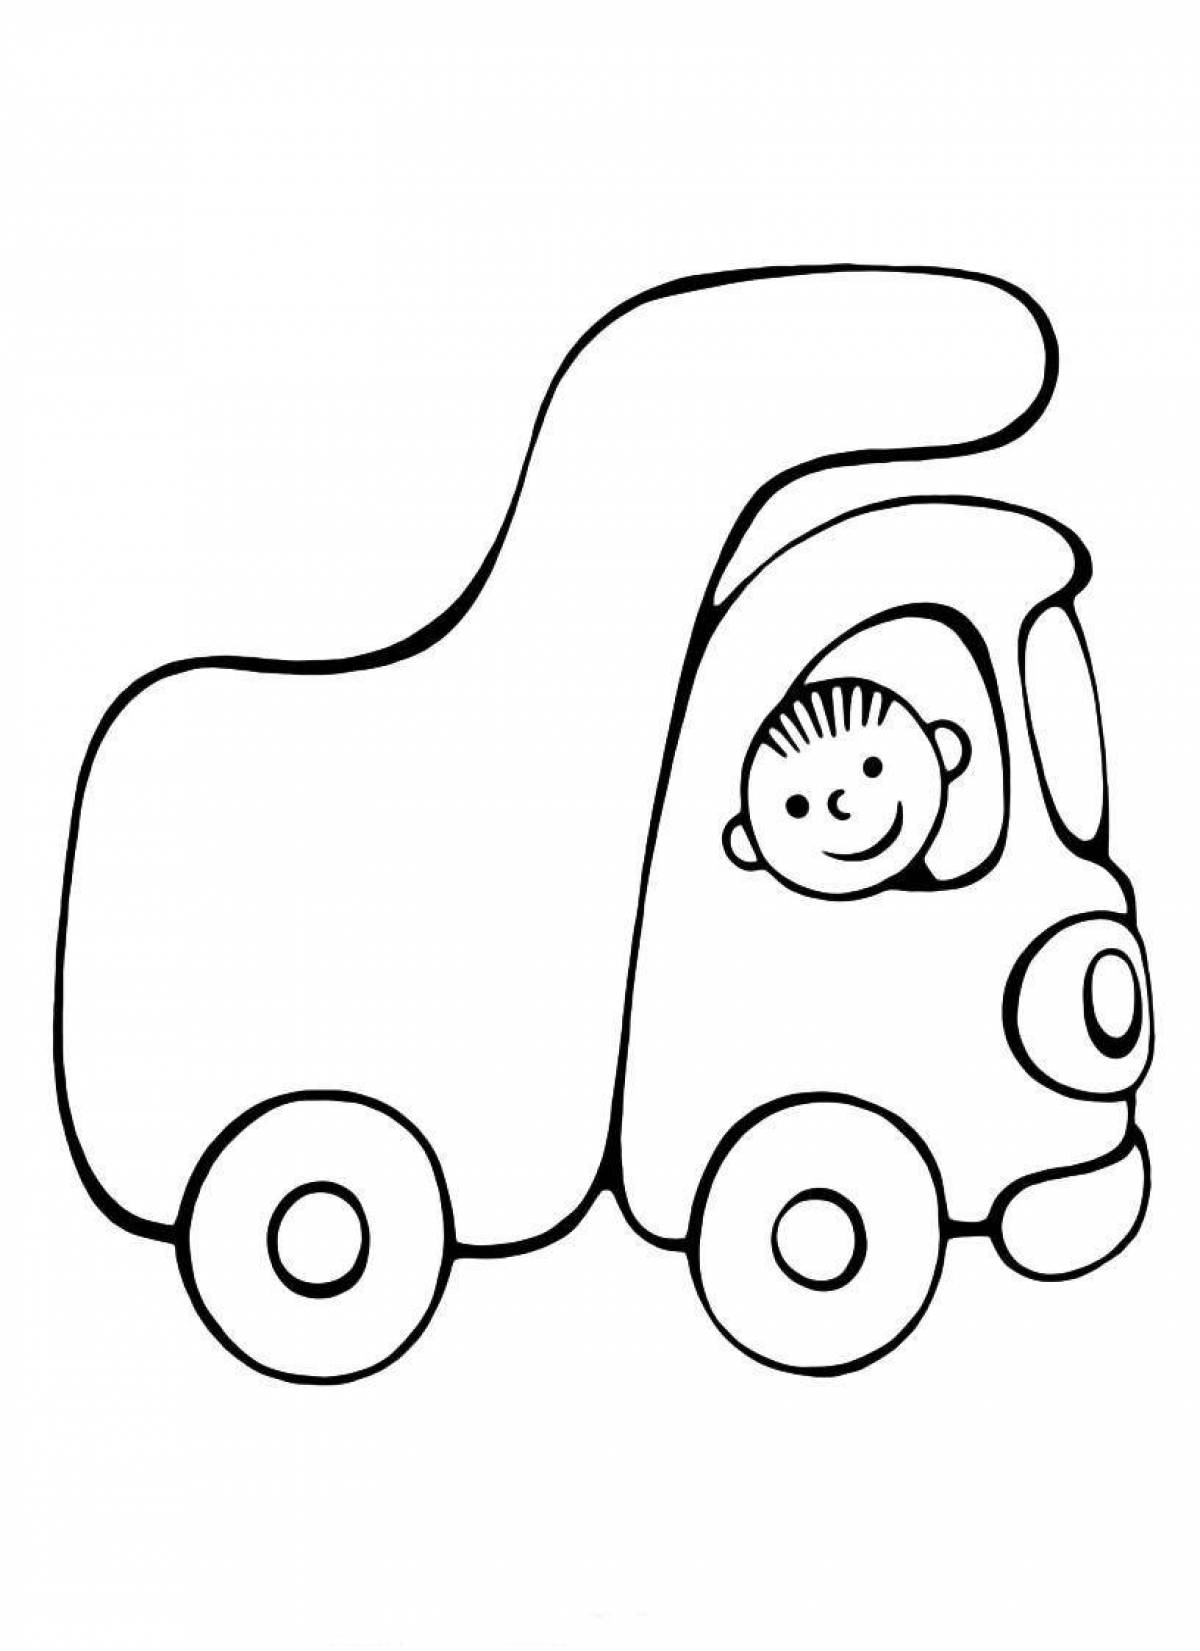 Gorgeous cars coloring book for kids